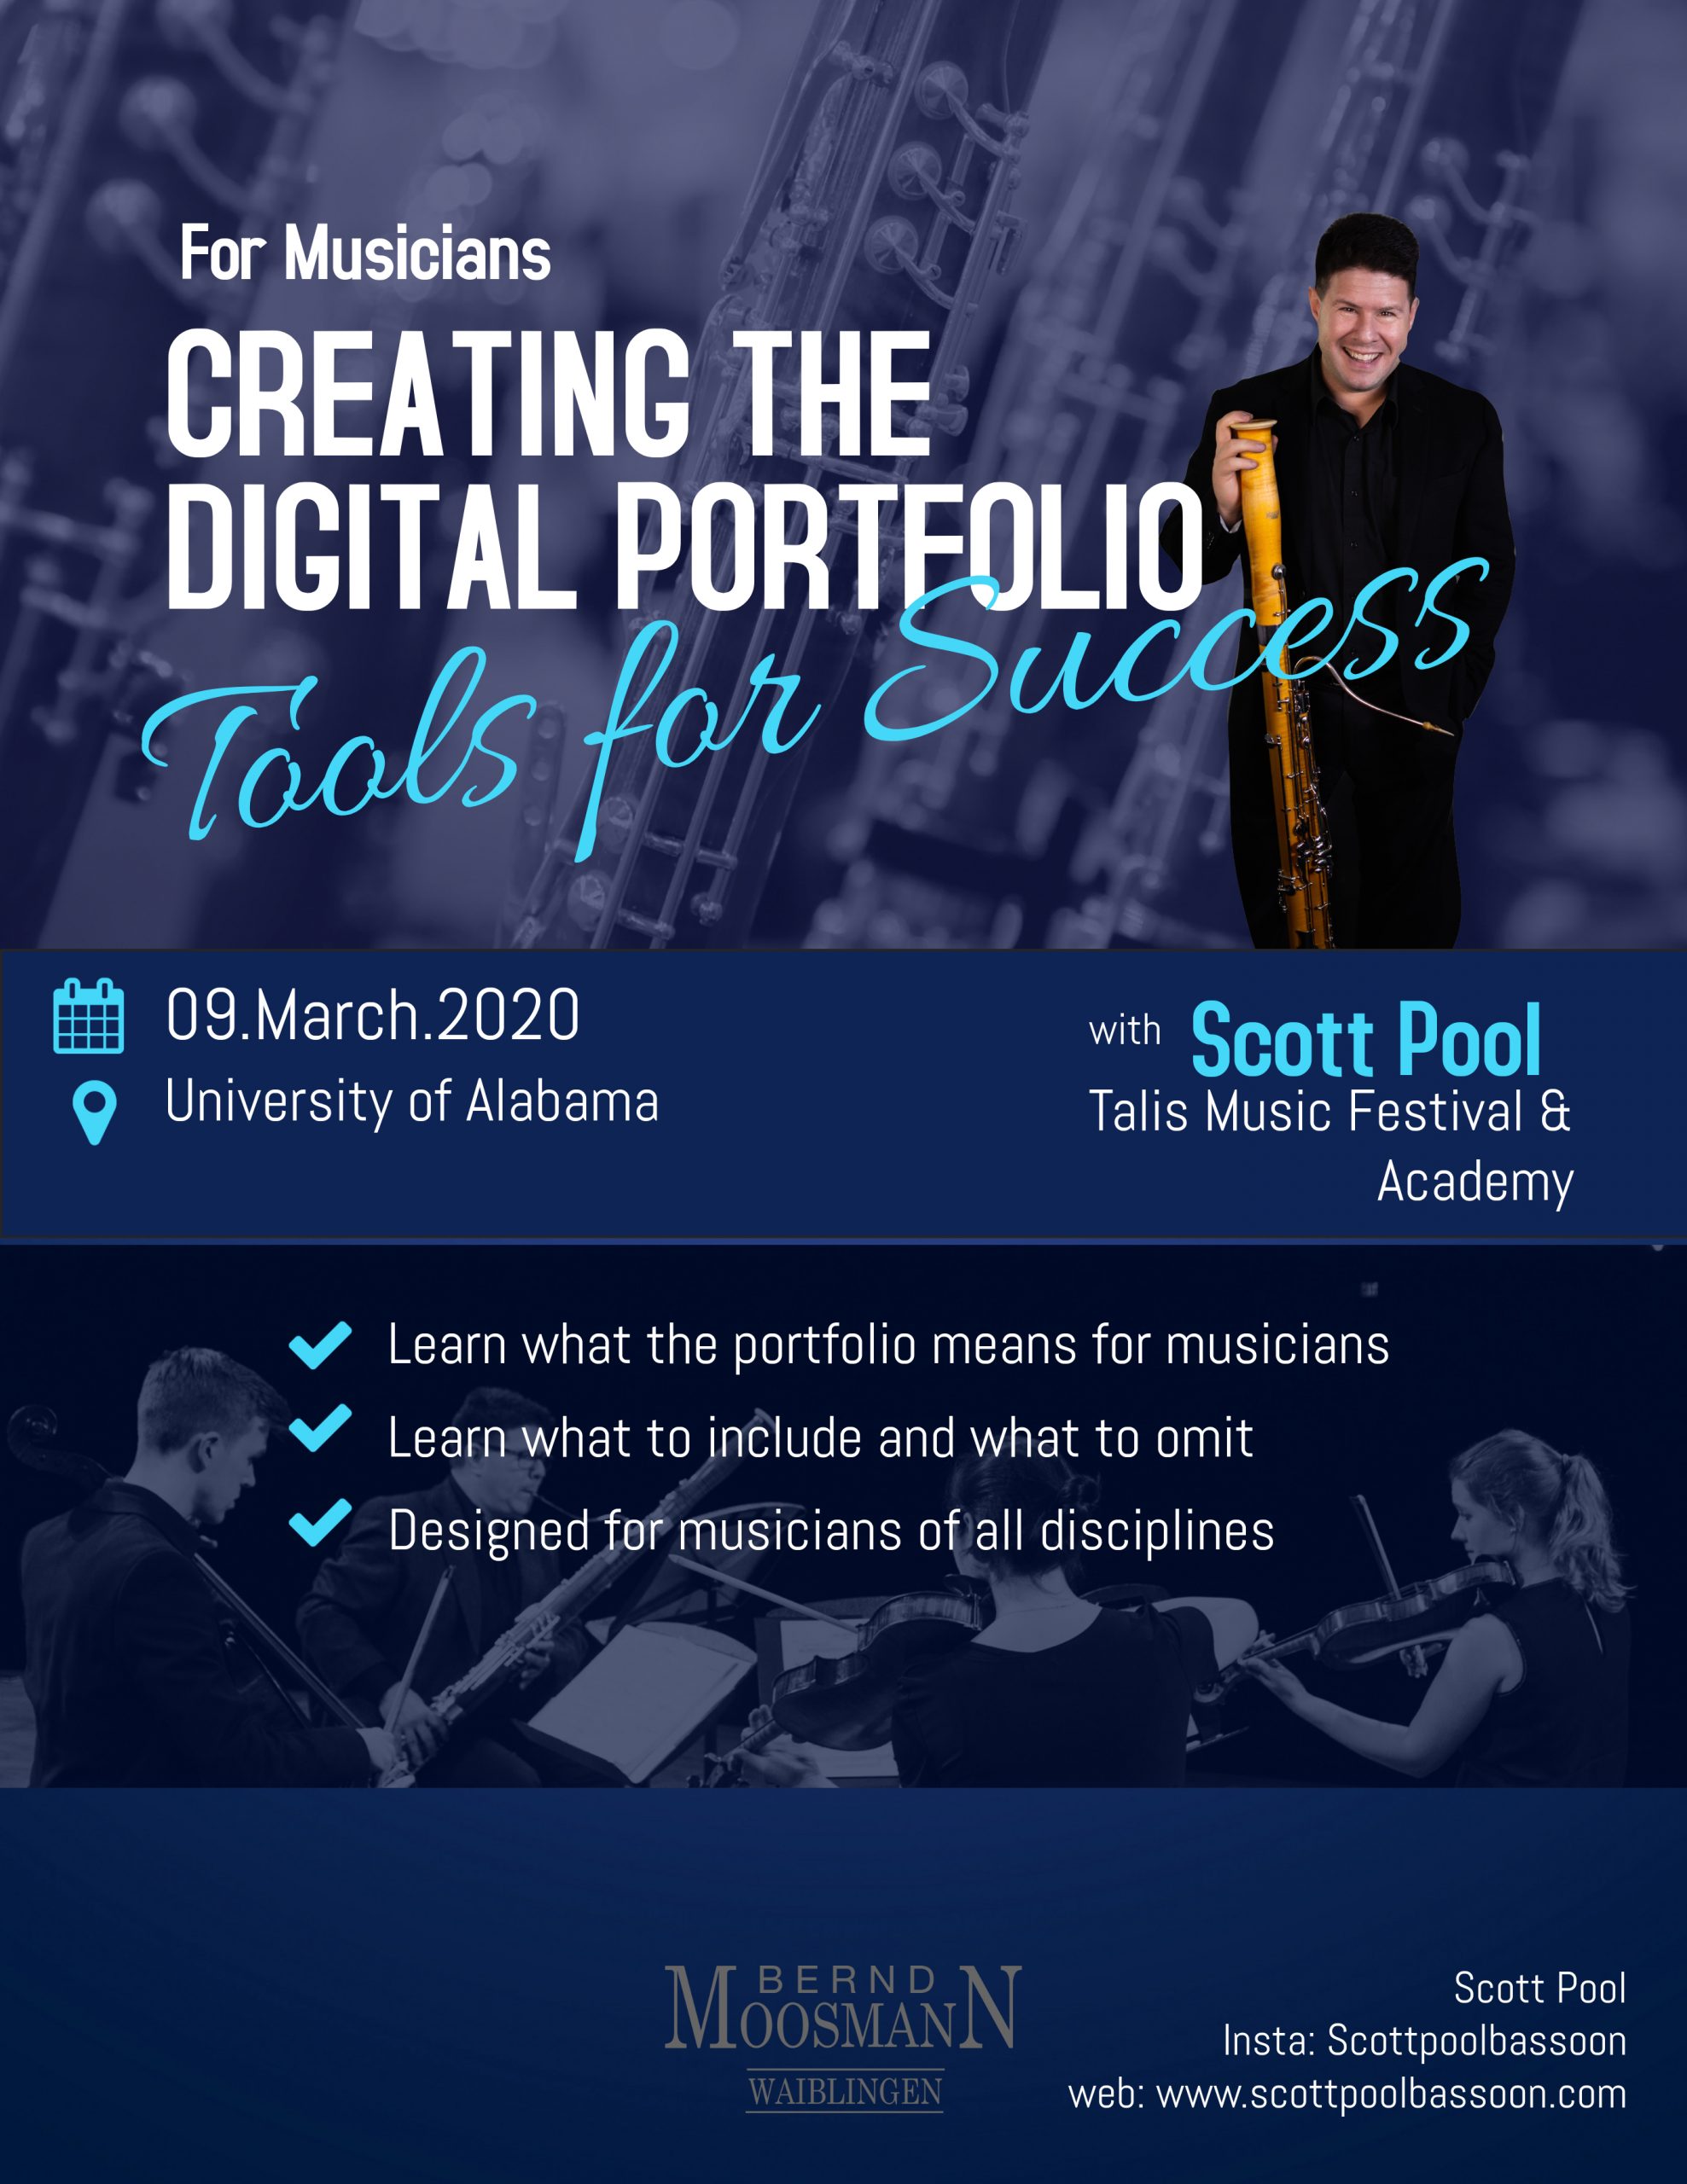 Flyer for a workshop titled "Creating the Digital Portfolio For Musicians: Tools for Success"